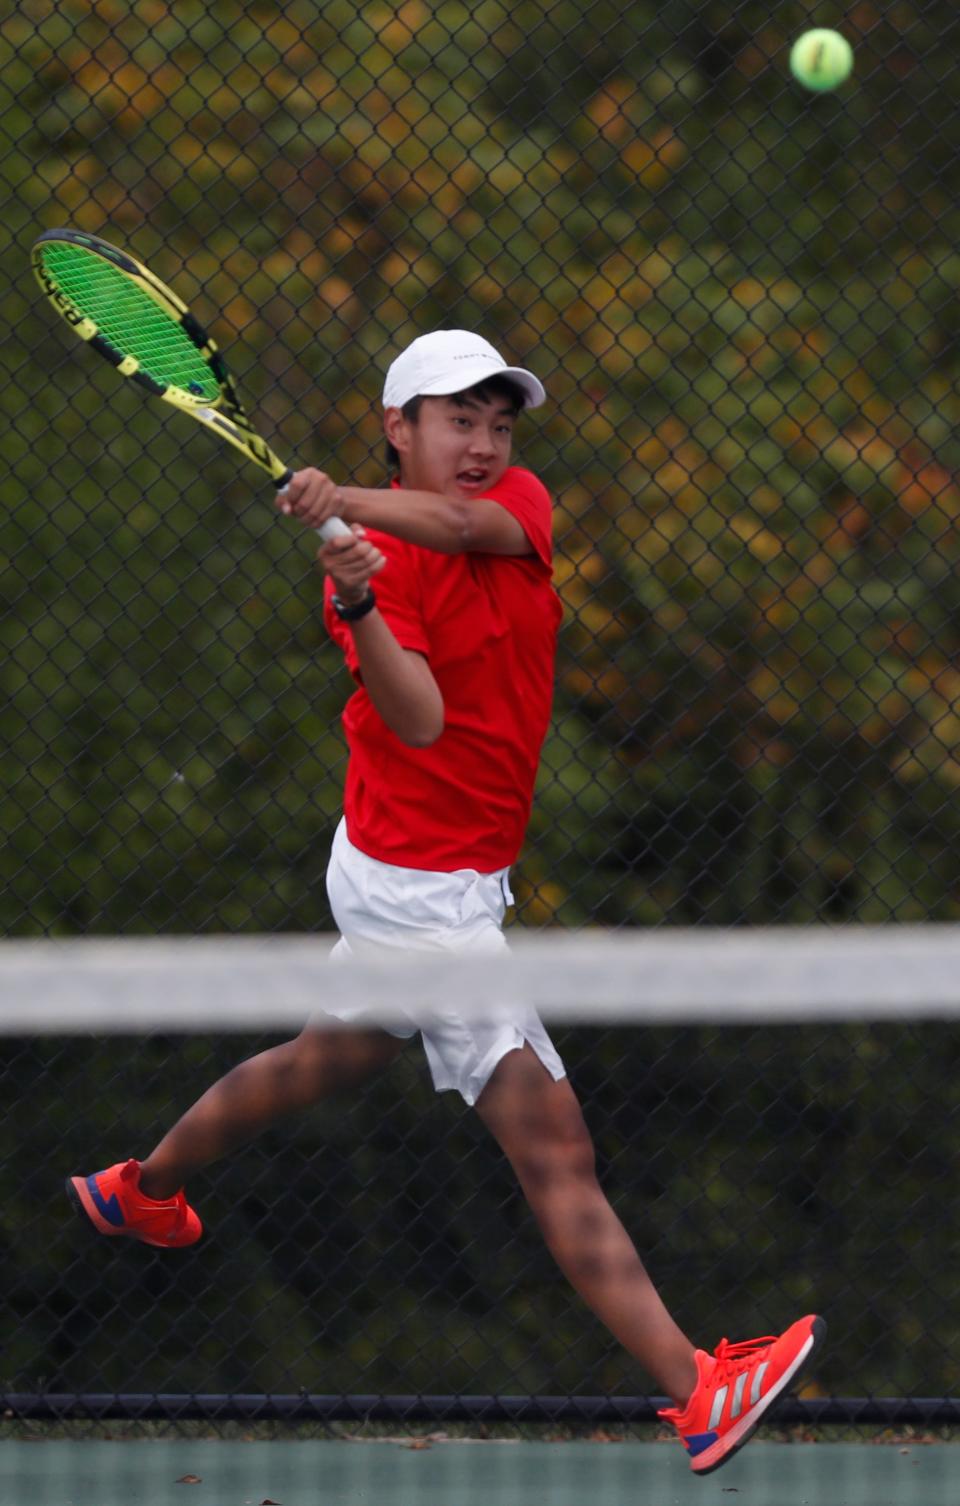 West Lafayette Gavin Ruan hits the ball during the IHSAA boy’s tennis sectional final against Harrison Andrew Kang, Thursday, Sept. 28, 2023, at Harrison High School in West Lafayette, Ind. West Lafayette won 3-2.